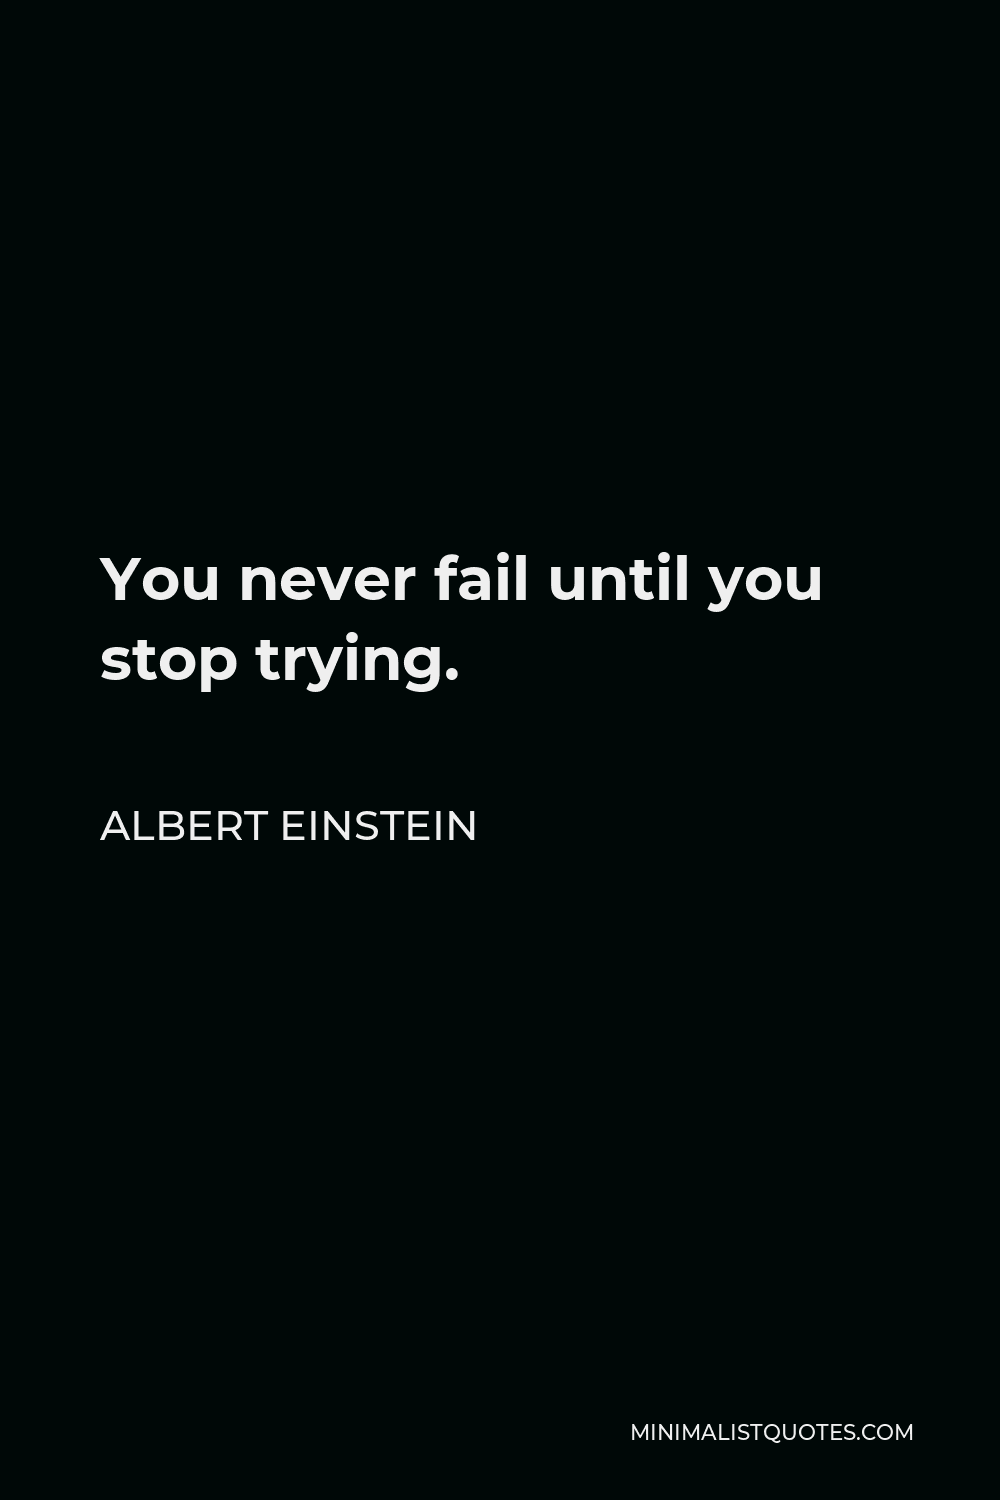 Albert Einstein Quote - You never fail until you stop trying.